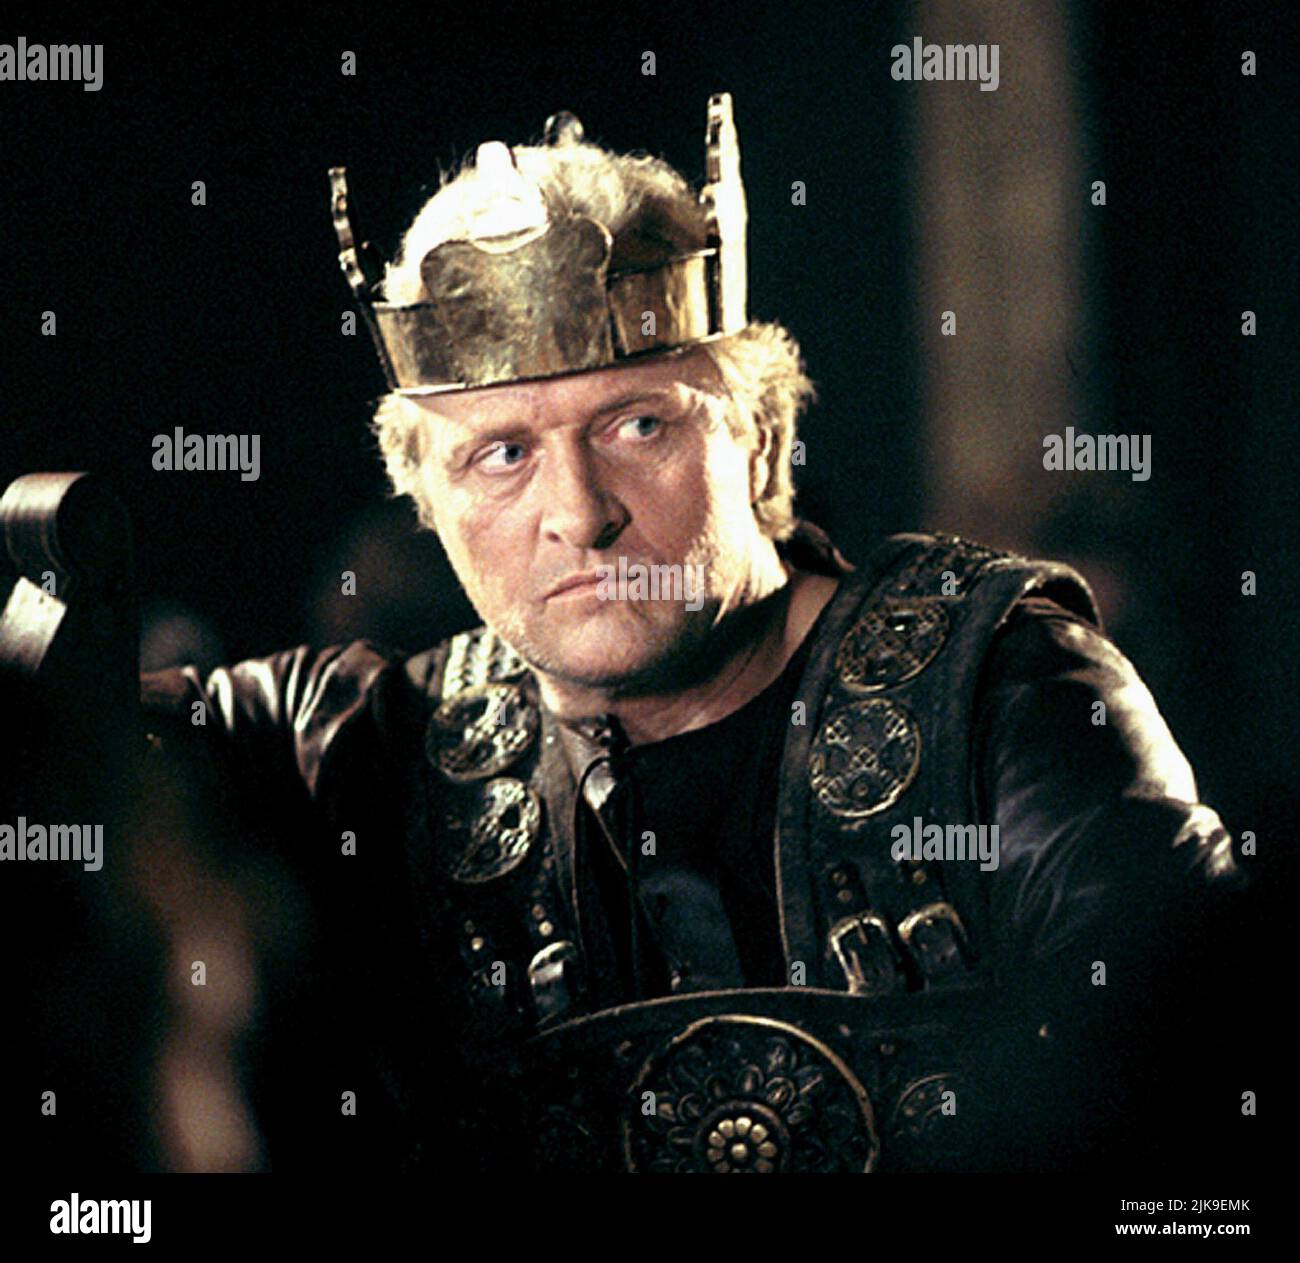 Rutger Hauer Television: Merlin (TV-Zweiteiler) Characters: King Vortigern  Usa/Uk 1998, / Mini Series Director: Steve Barron 26 April 1998 **WARNING**  This Photograph is for editorial use only and is the copyright of